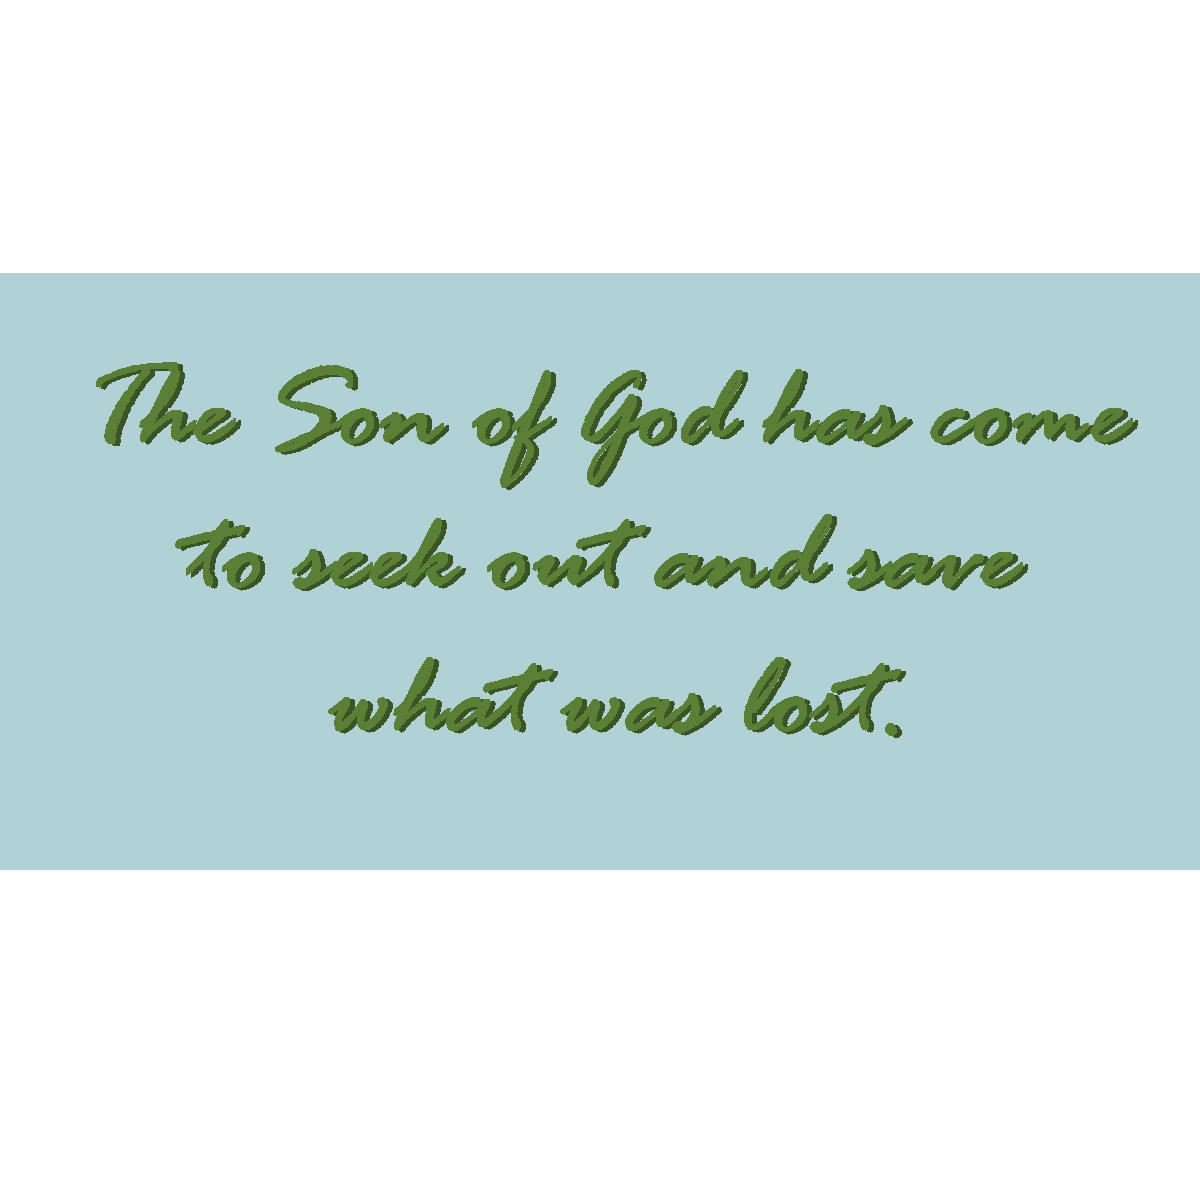 "The Son of God has come to seek out and save what was lost"